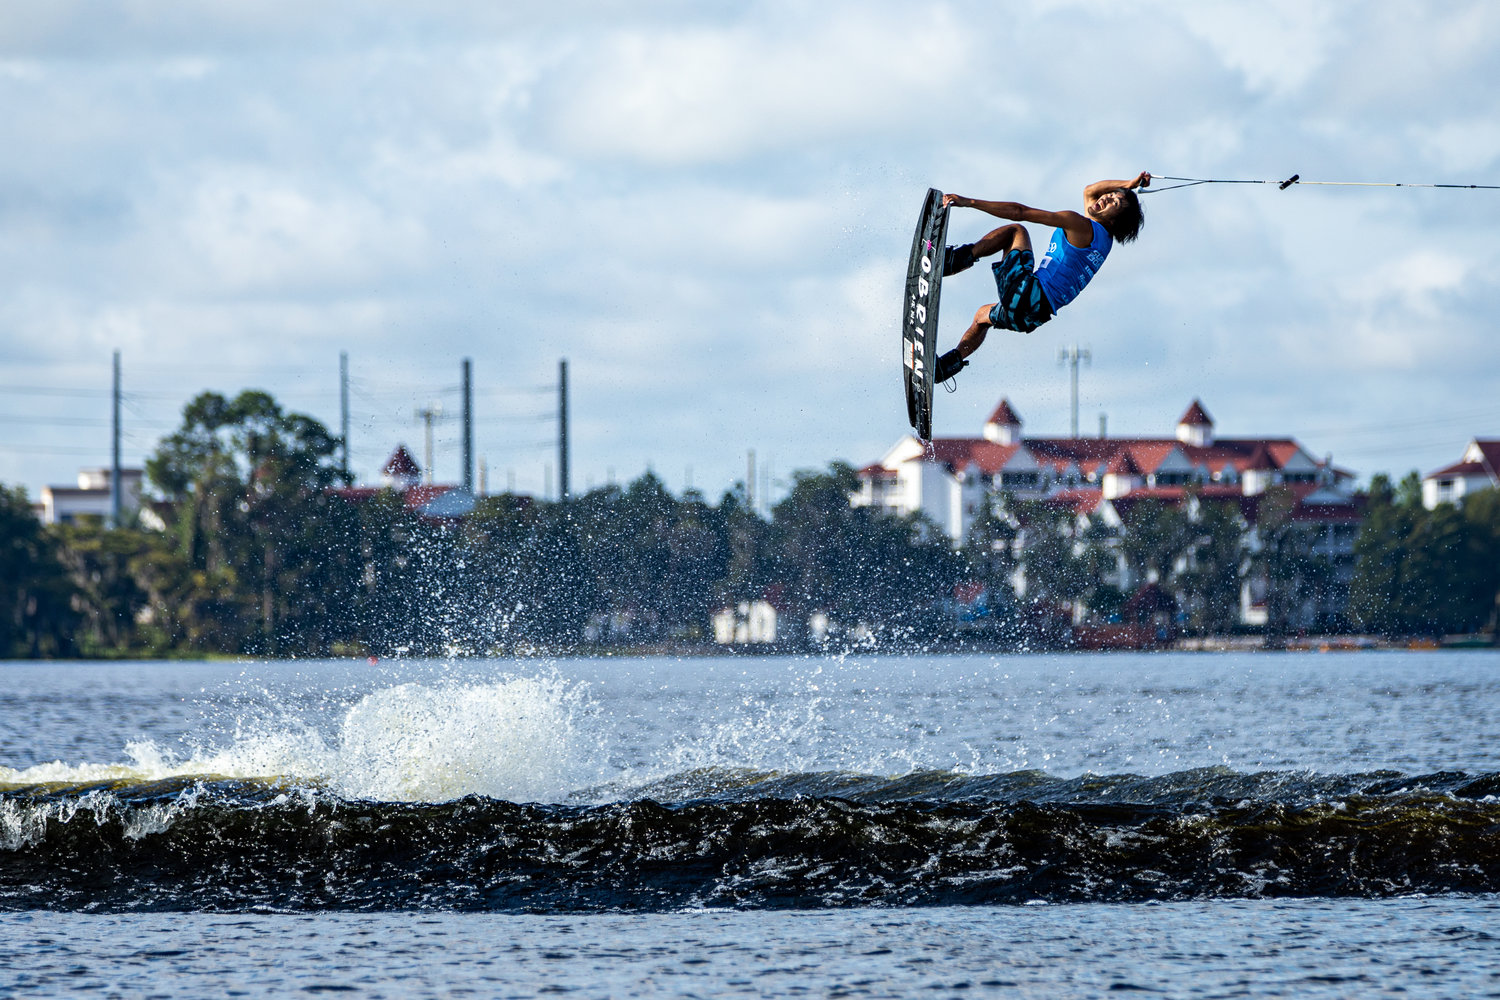 Some of the world’s most talented wakeboarders and wakesurfers come to Katy on Saturday, June 12, to compete at the Pro Wakeboard, Pro Wakesurf and Junior Pro Wakeboard tours. It is the longest-running professional wakeboard circuit.